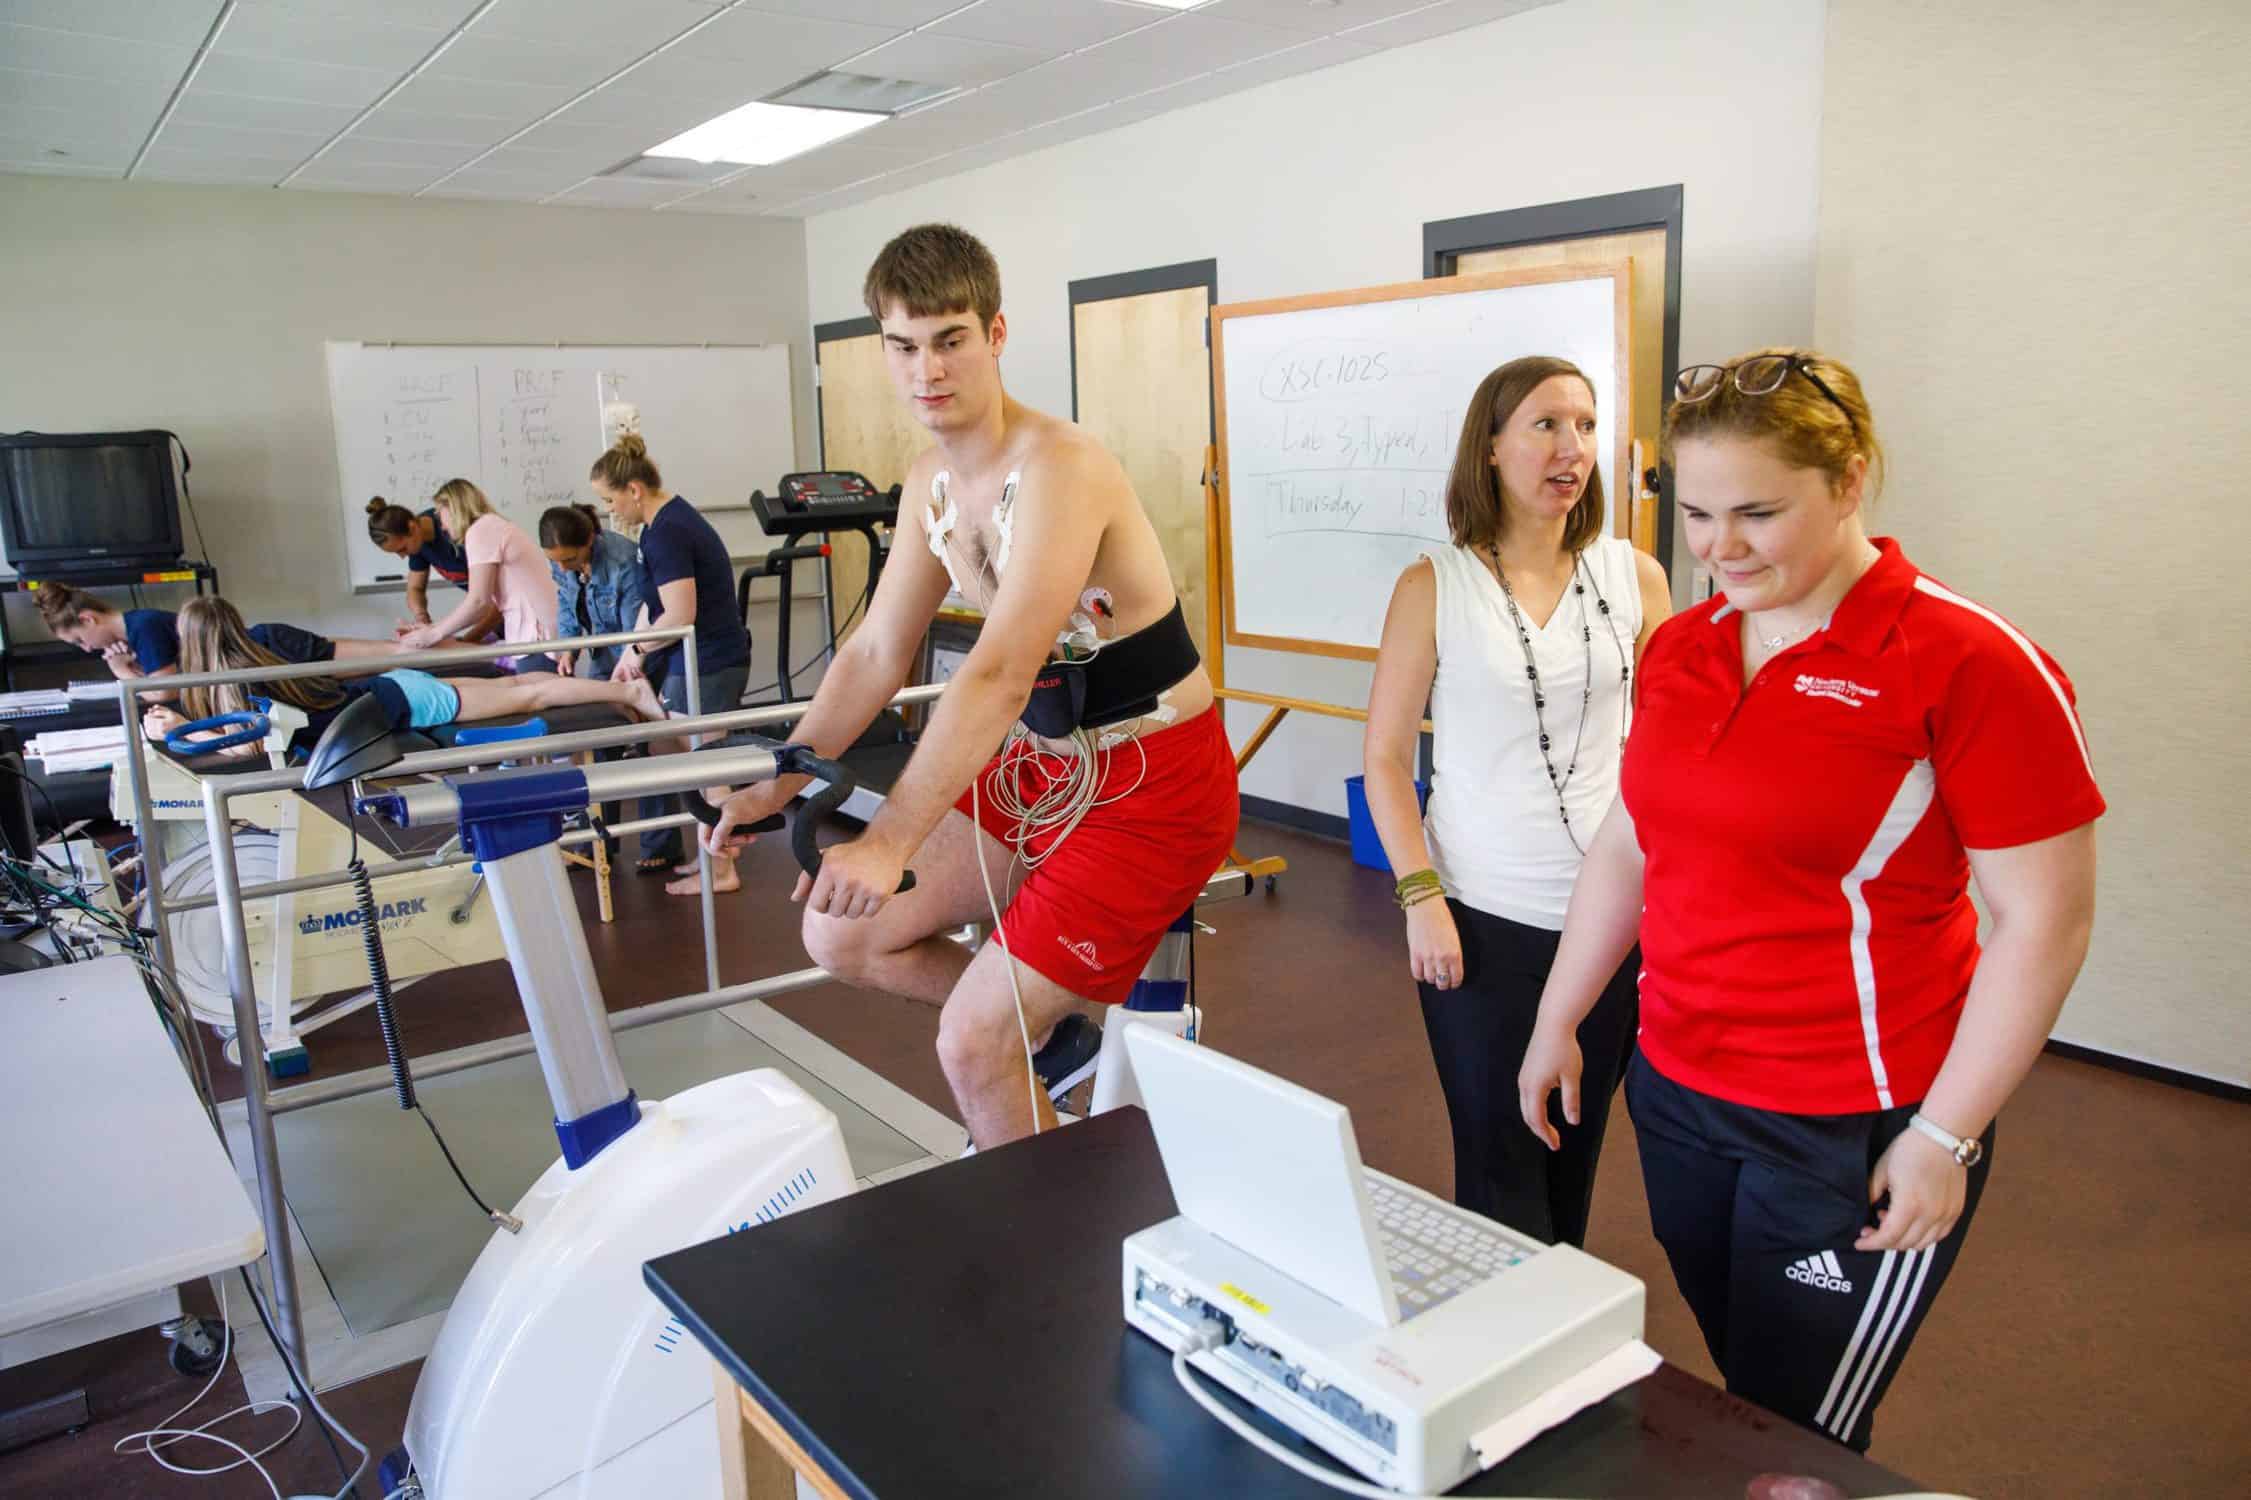 Student is examined by another student while he exercises